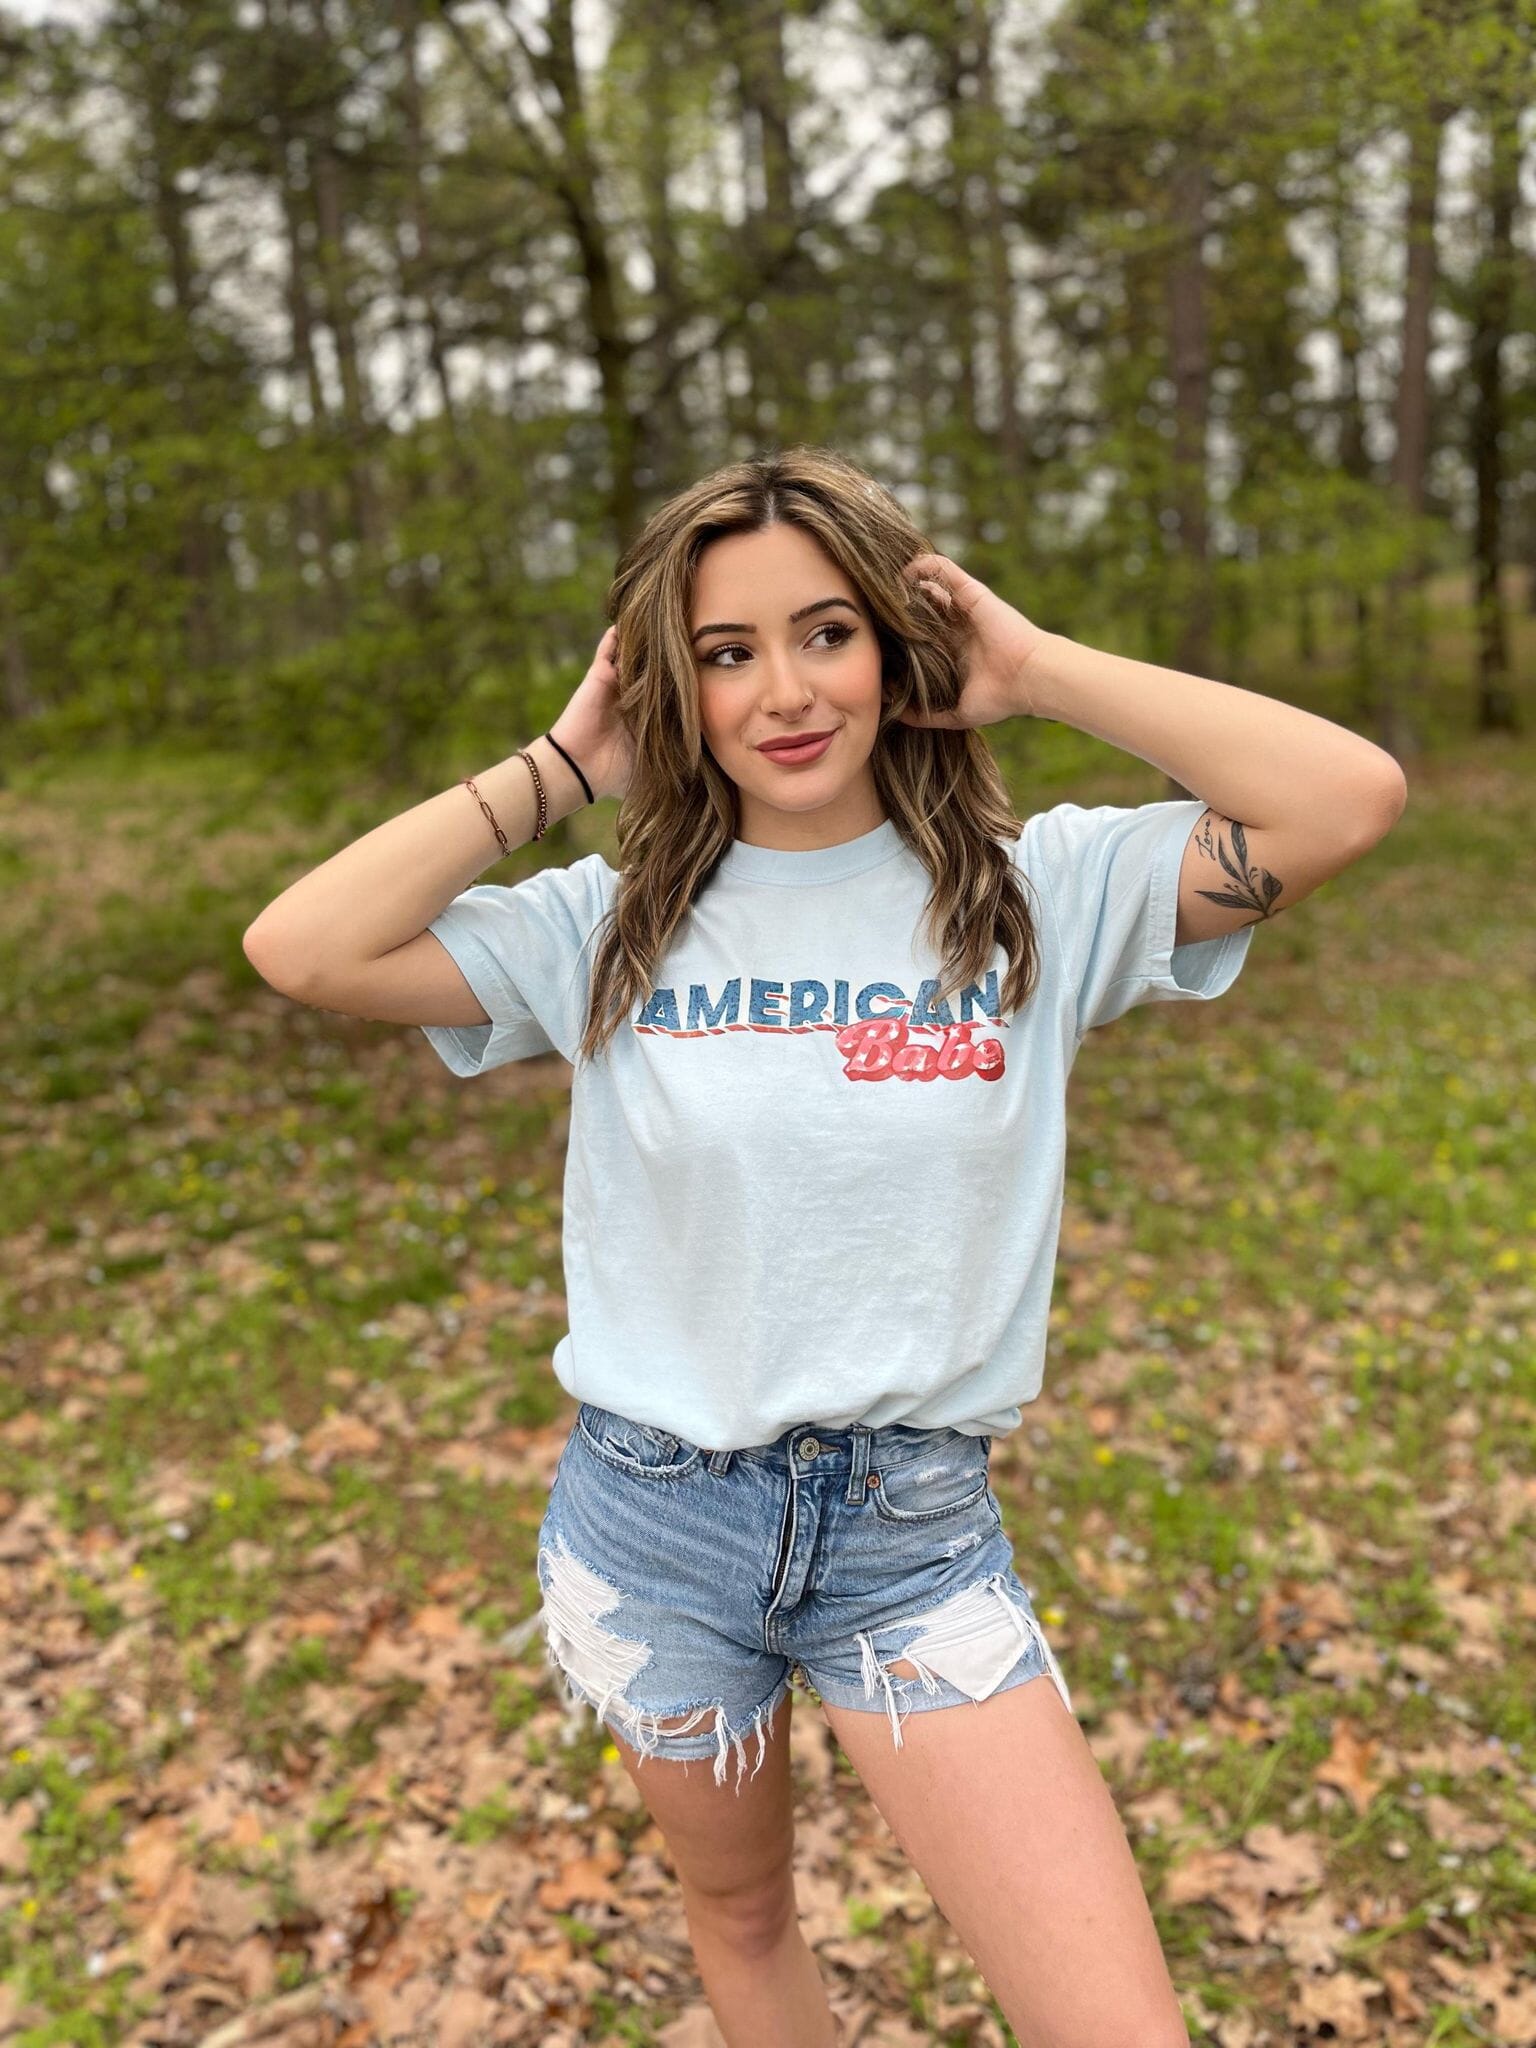 American Babe Tee ask apparel wholesale 